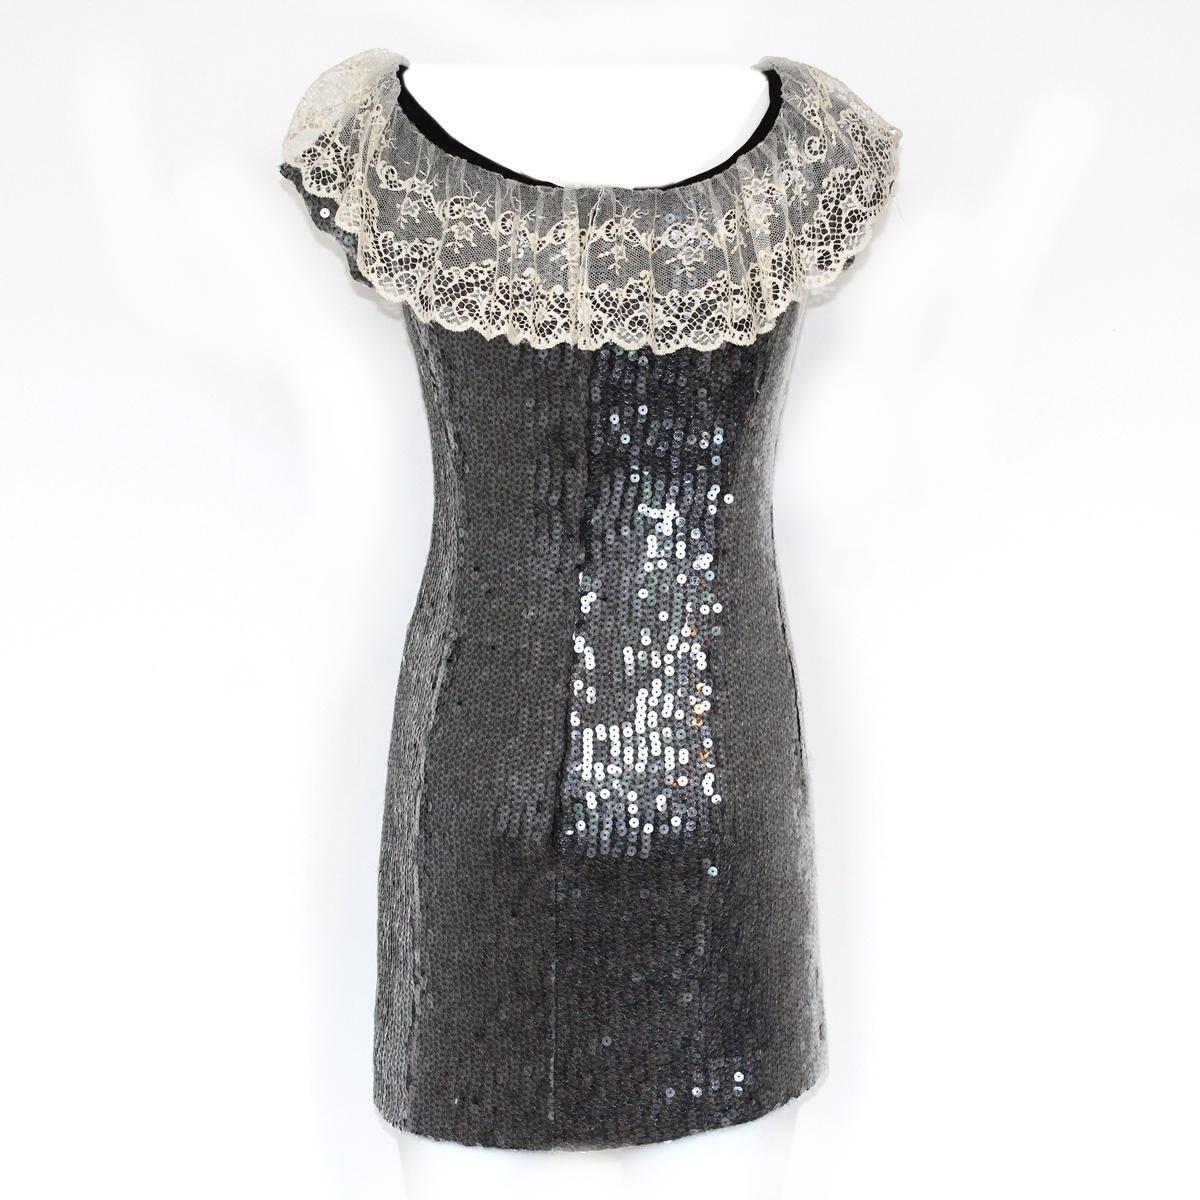 Fantastic Chanel dress
Polyester
Silk lining
Silver coloured sequins
White lace
Black bow
Sleeveless
Total lenght (shoulder/hem) cm 75 (29.5 inches)
French size 38 (italian 42)
Worldwide express shipping included in the price !